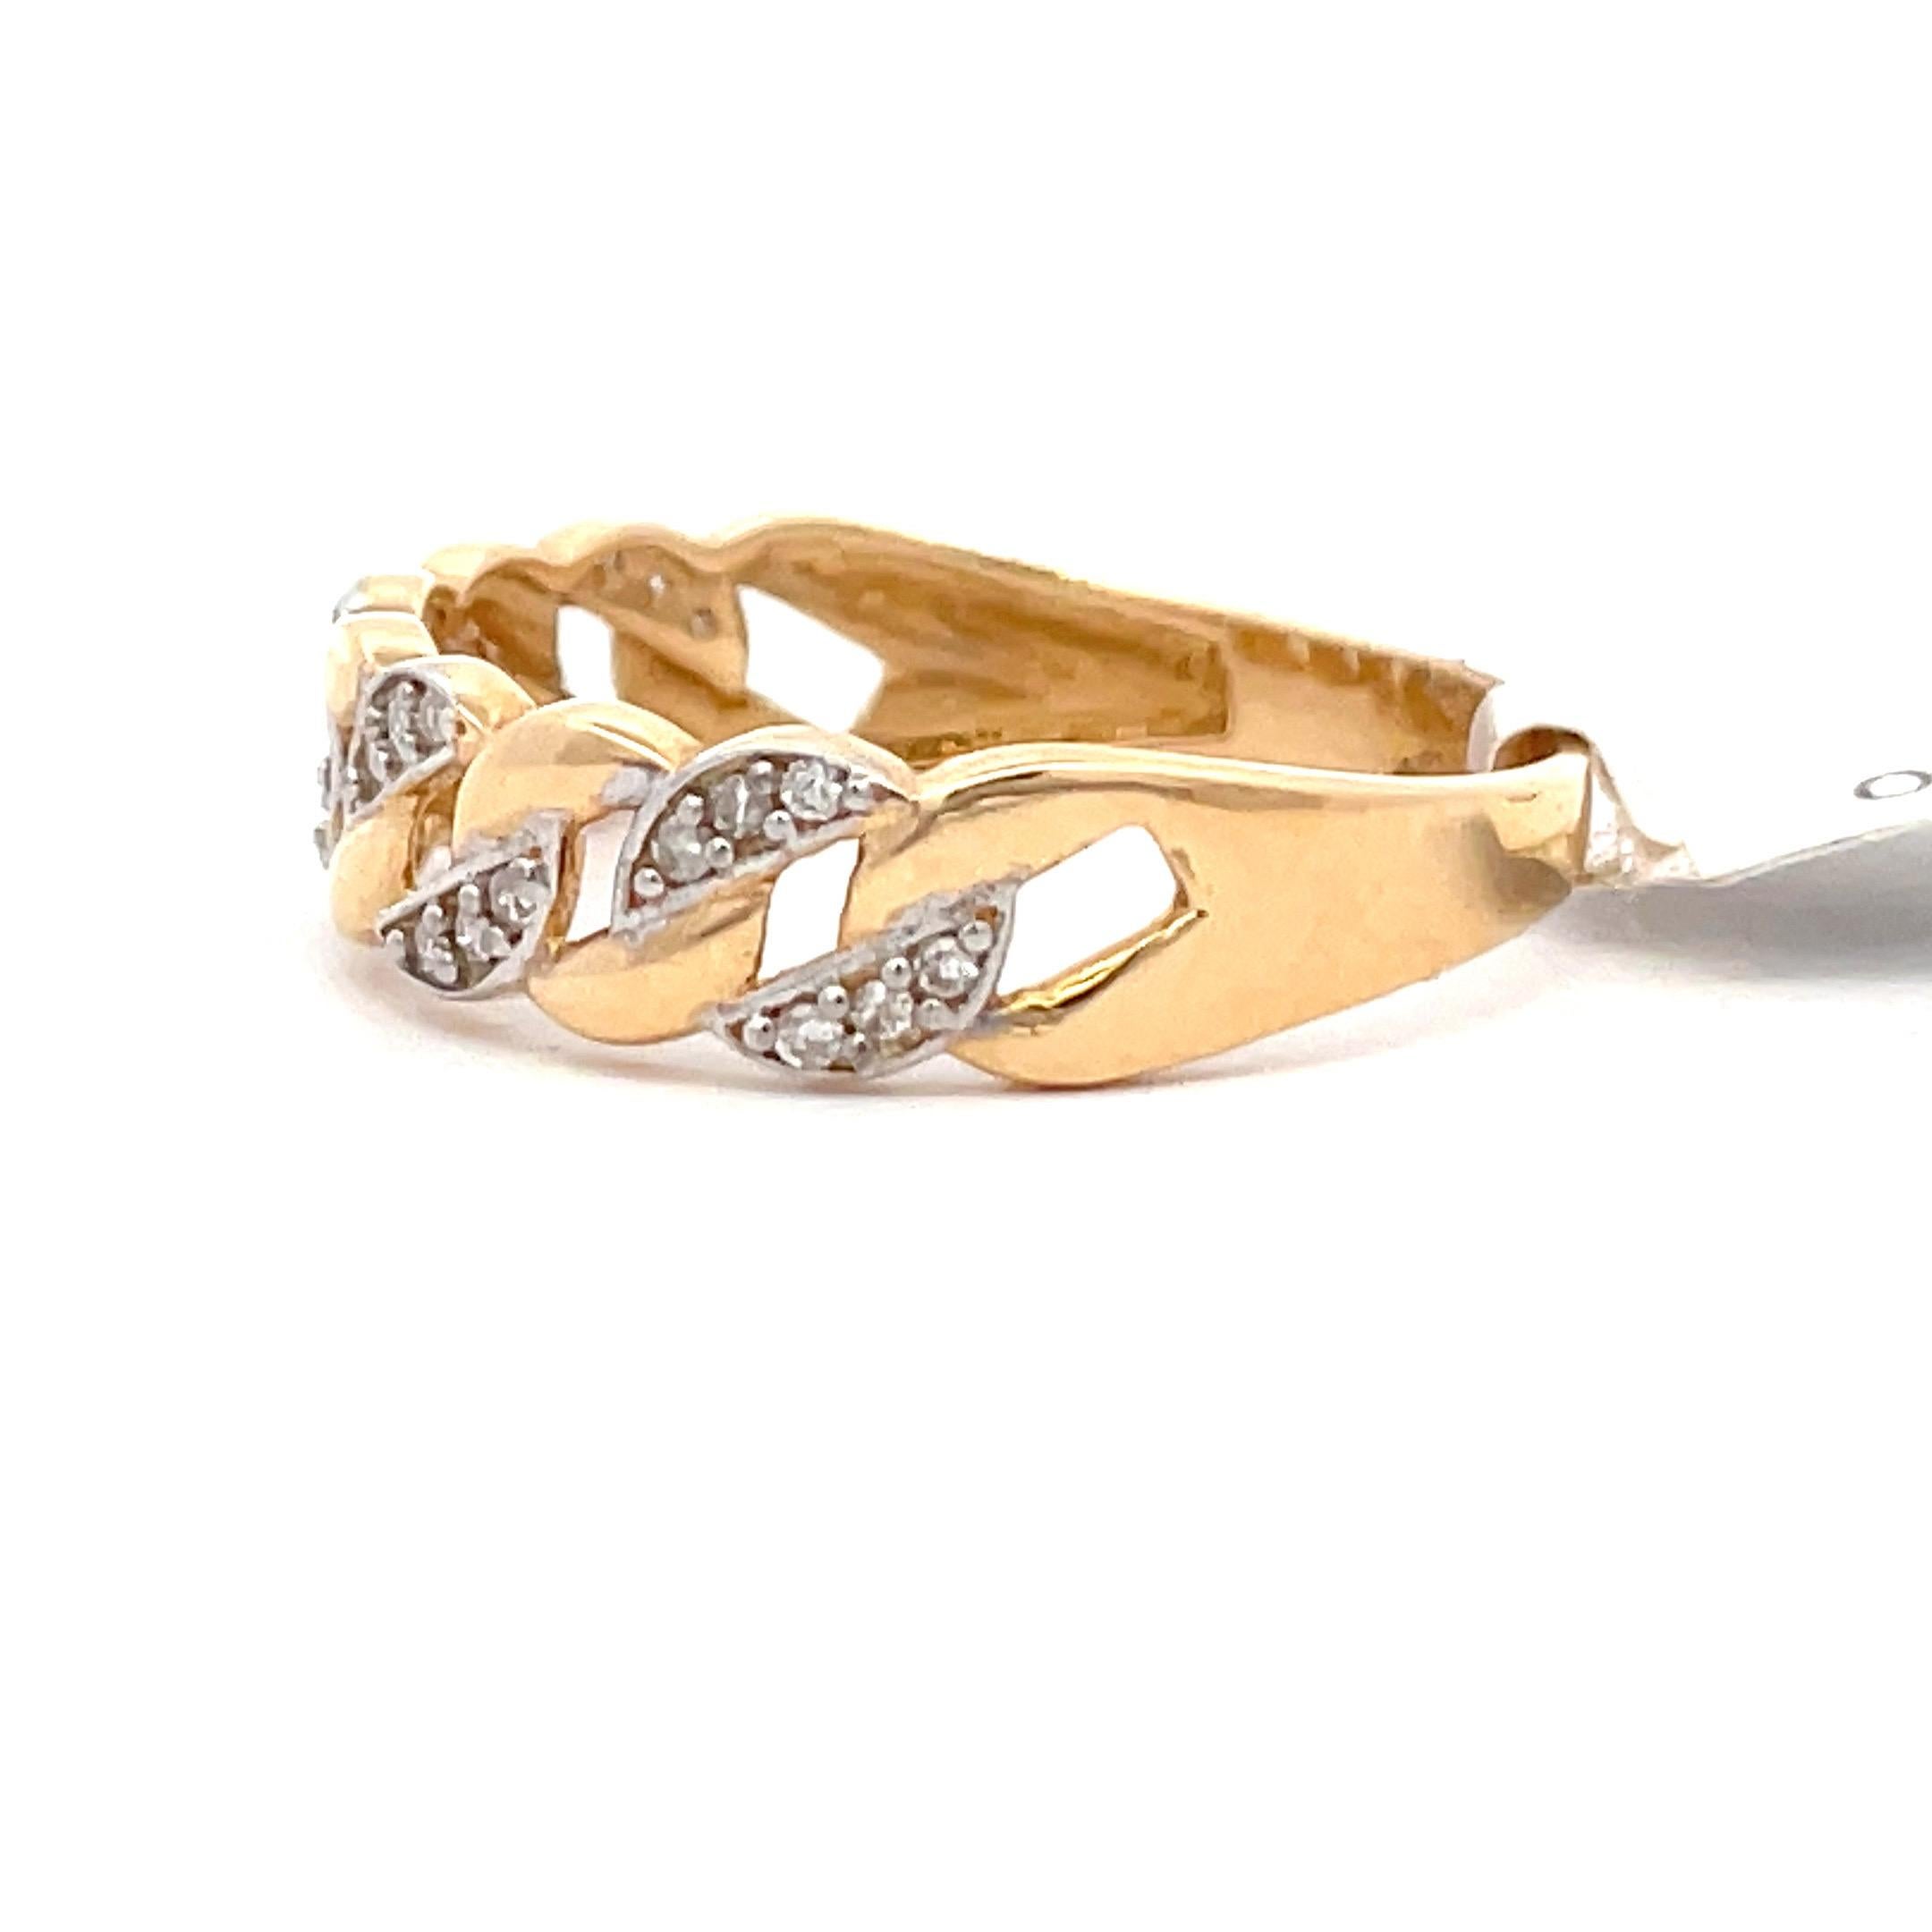 Cuban and gold link fashion ring with round brilliants weighing 0.10 carats.
